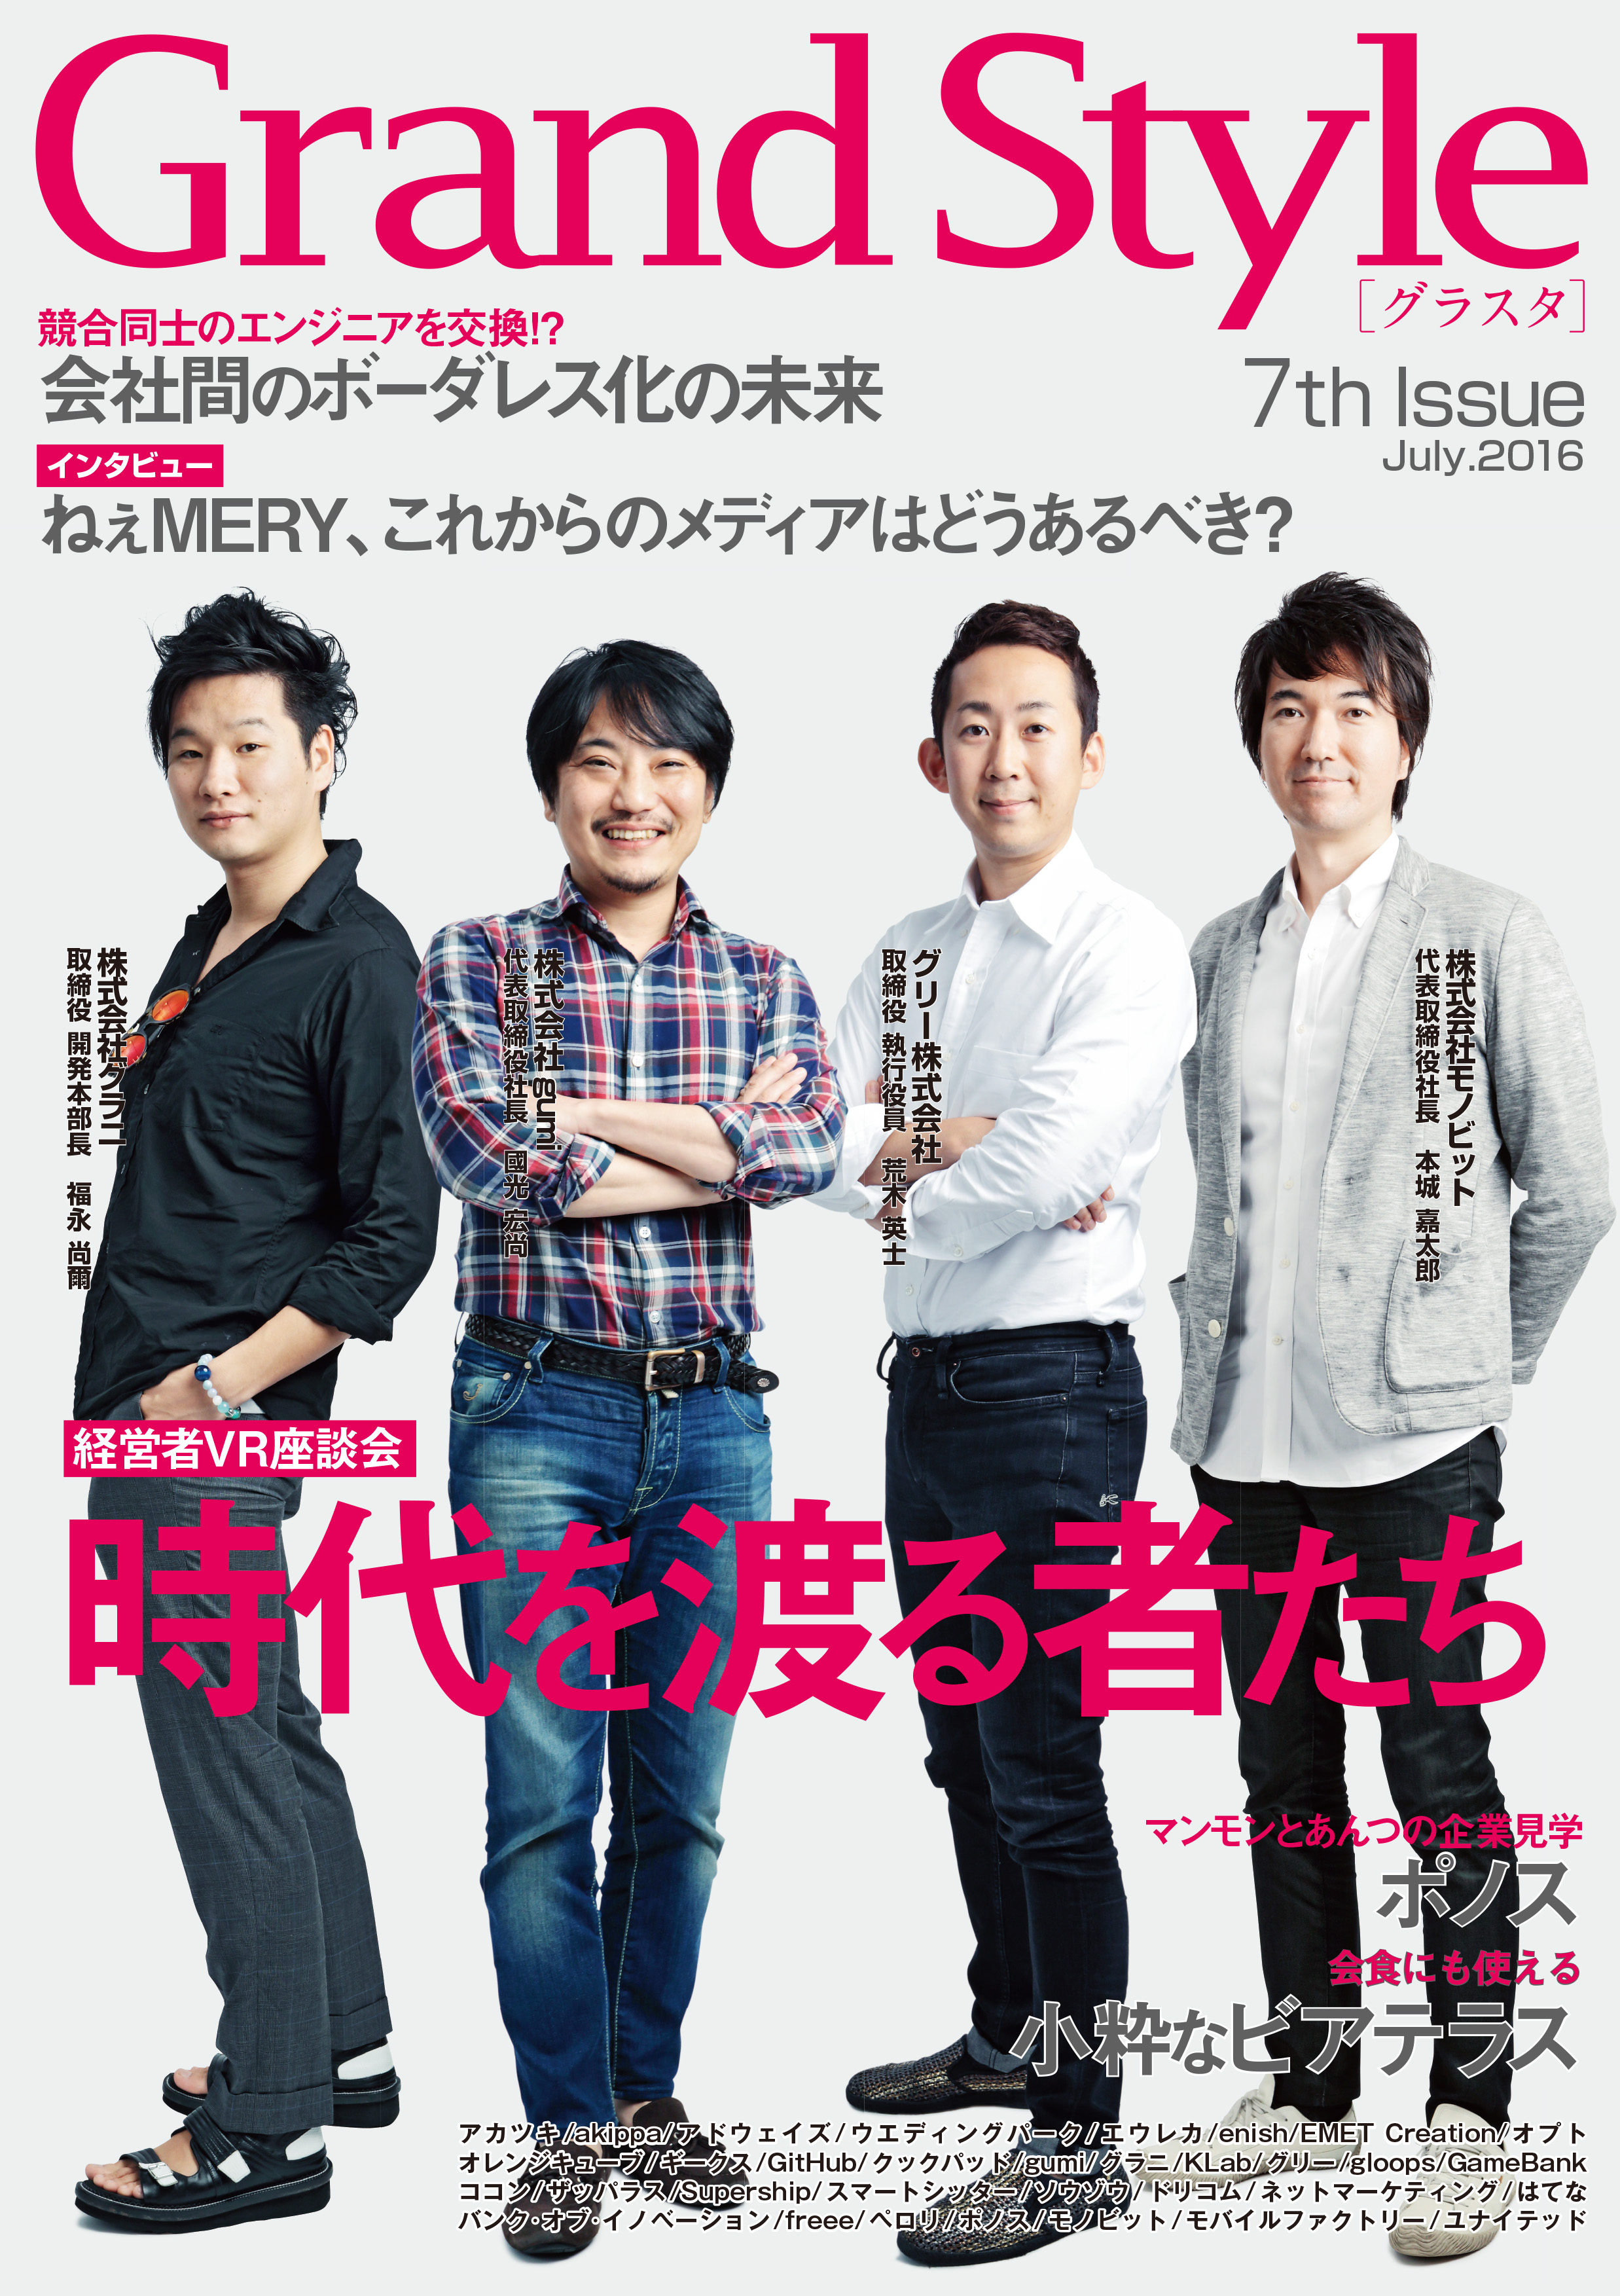 『Grand Style』7th Issue